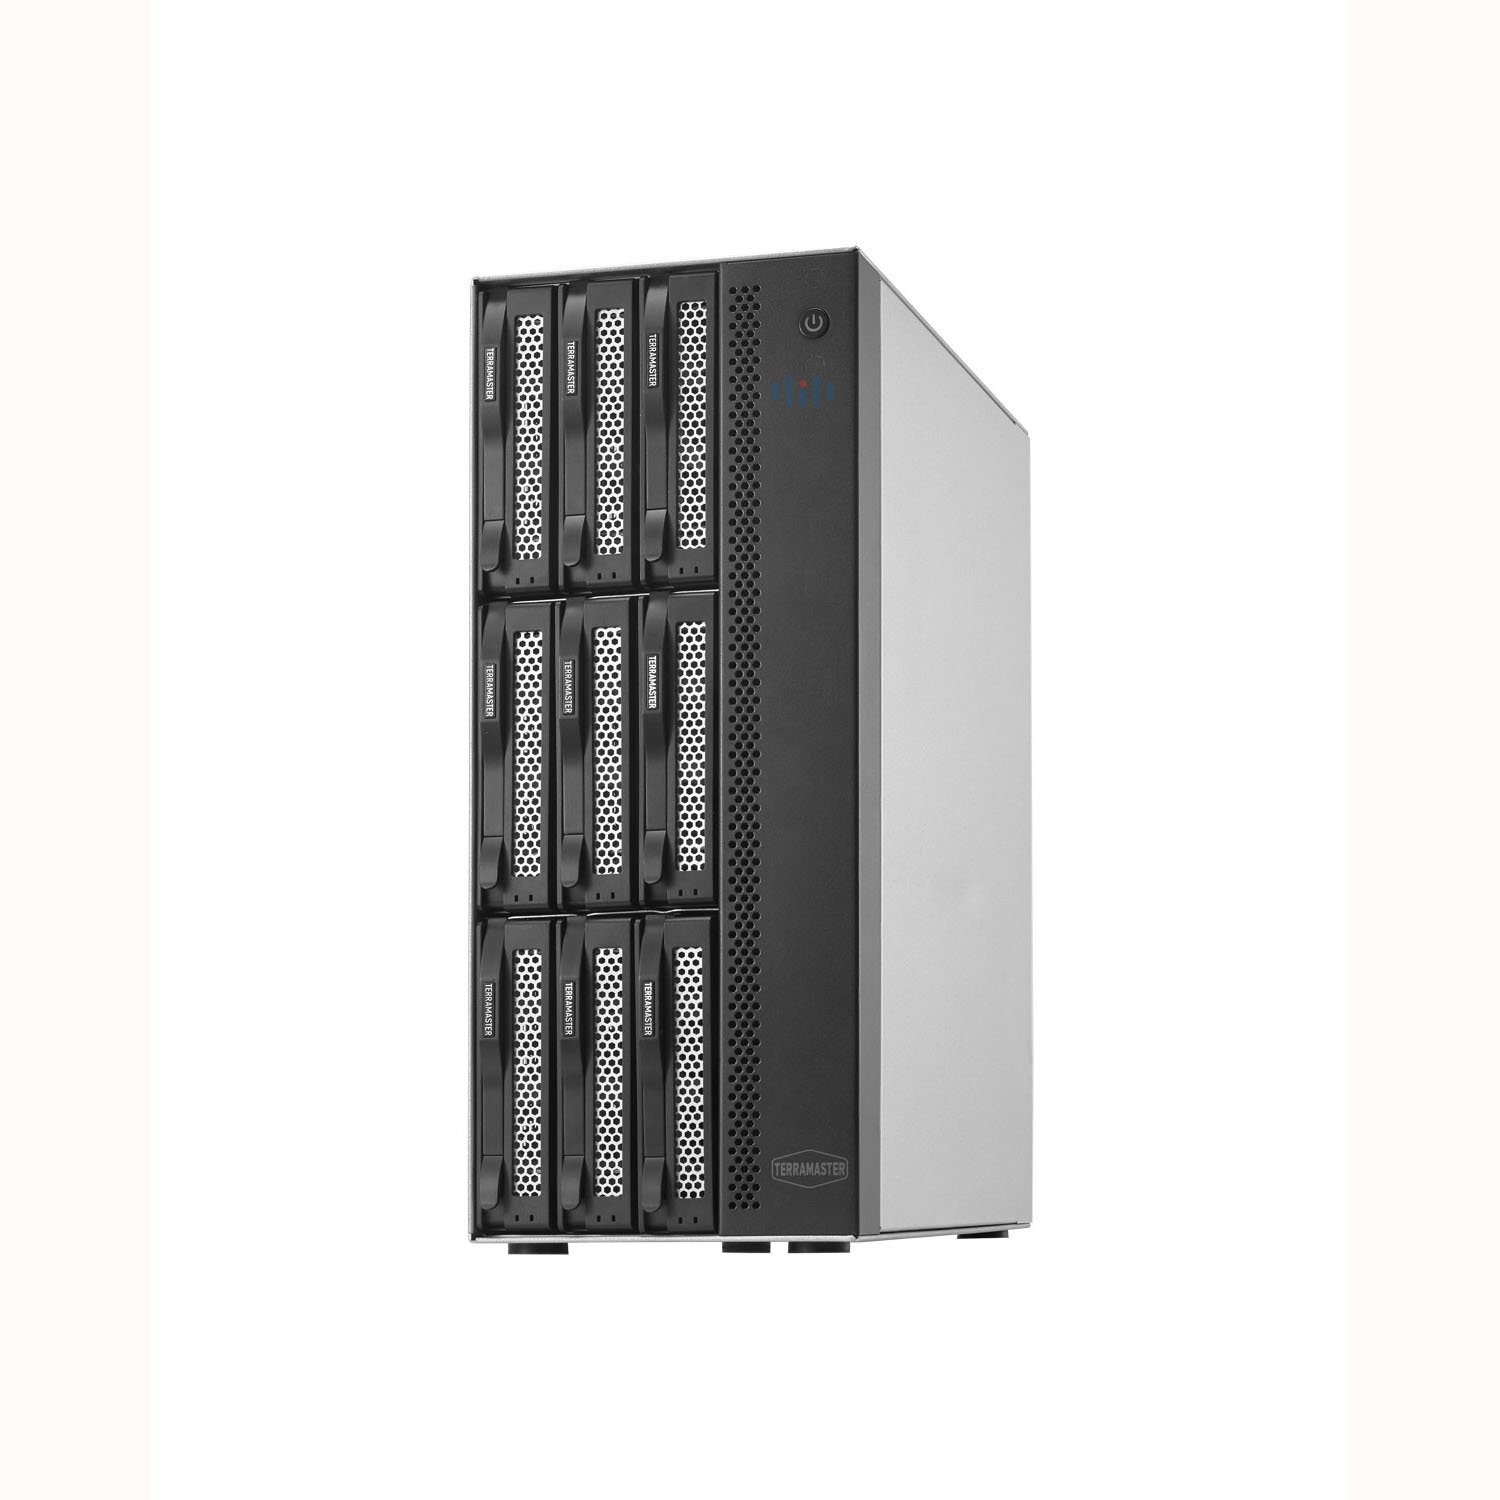 TerraMaster T9-450 all in one 9Bay Tower NAS